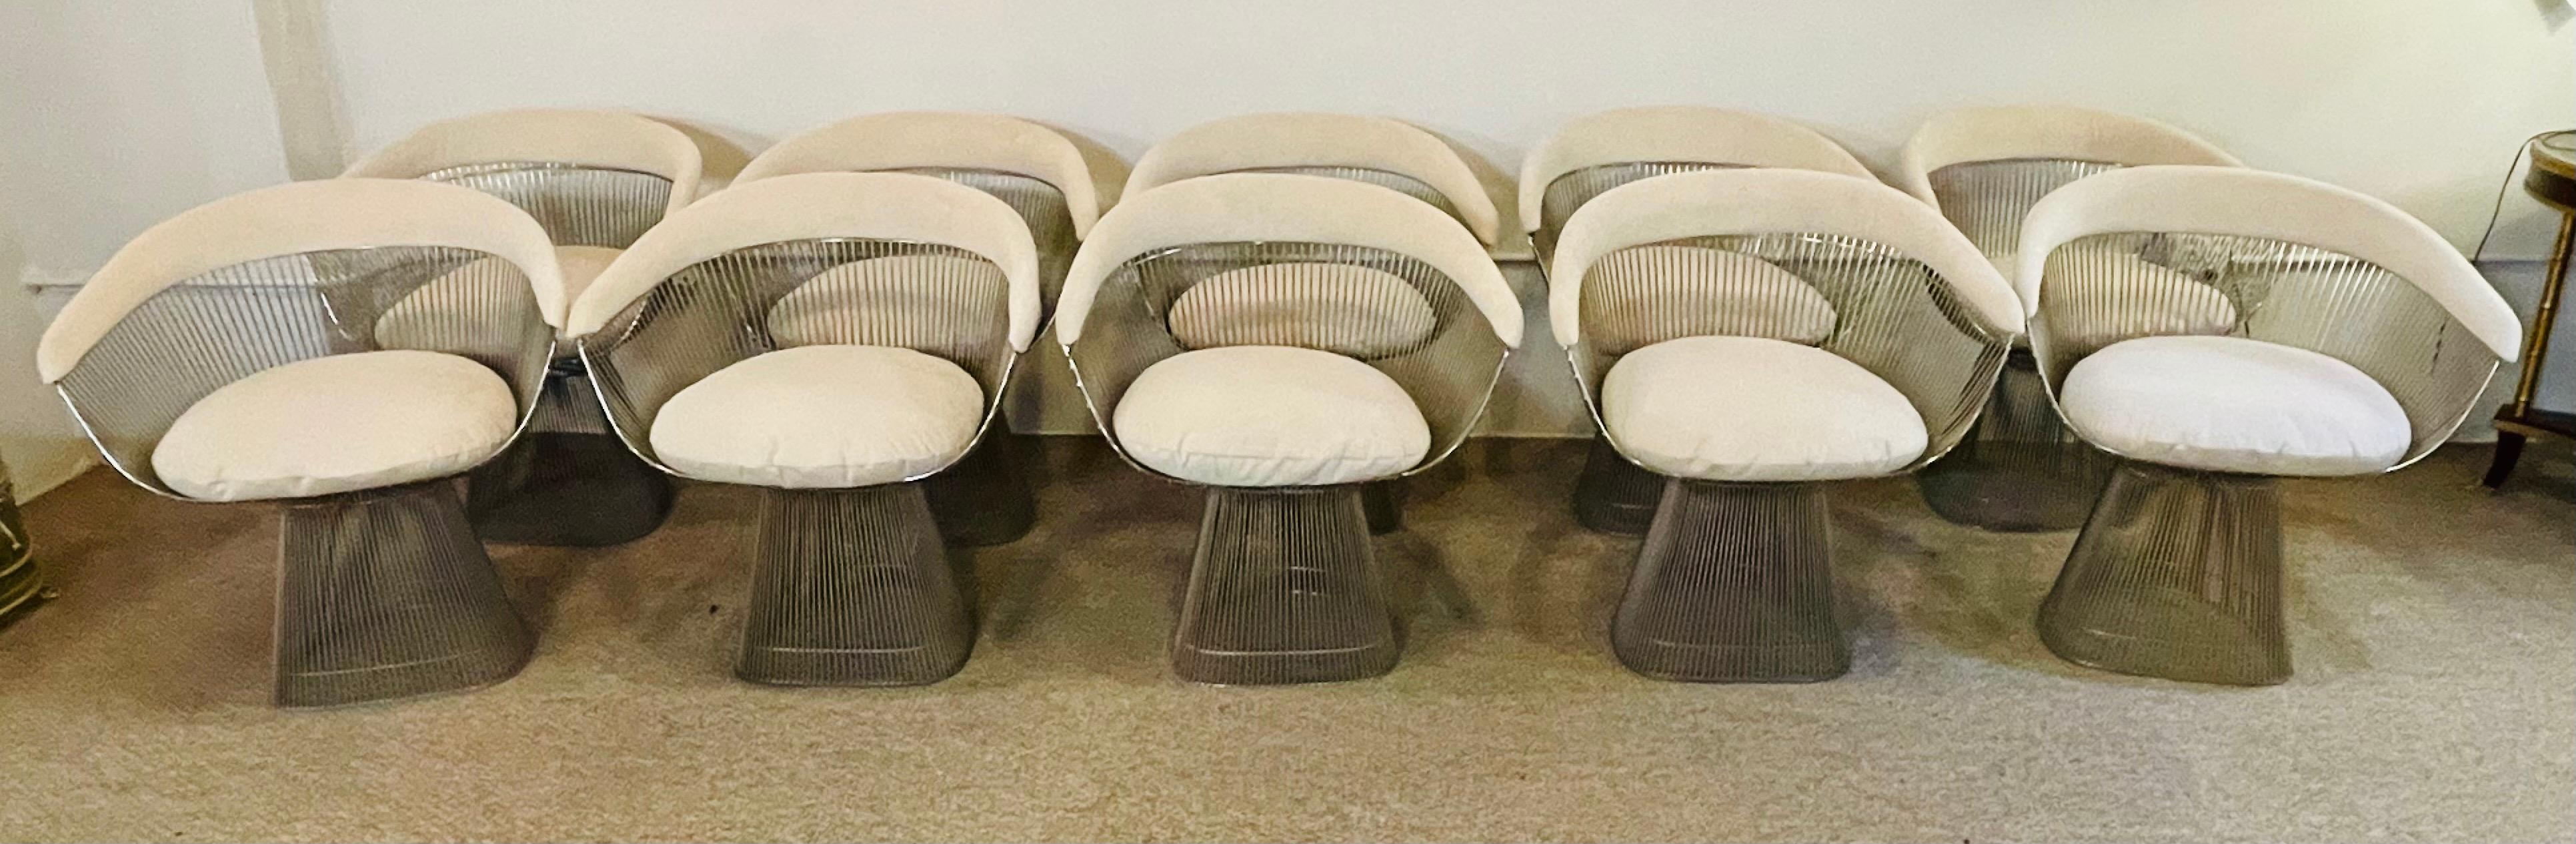 Ten Platner arm chairs vintage circa 1970s. New fabric. In 1966, the Platner Collection captured the “decorative, gentle, graceful” shapes that were beginning to infiltrate the modern vocabulary. The Arm Chair, which can be used as a dining chair or